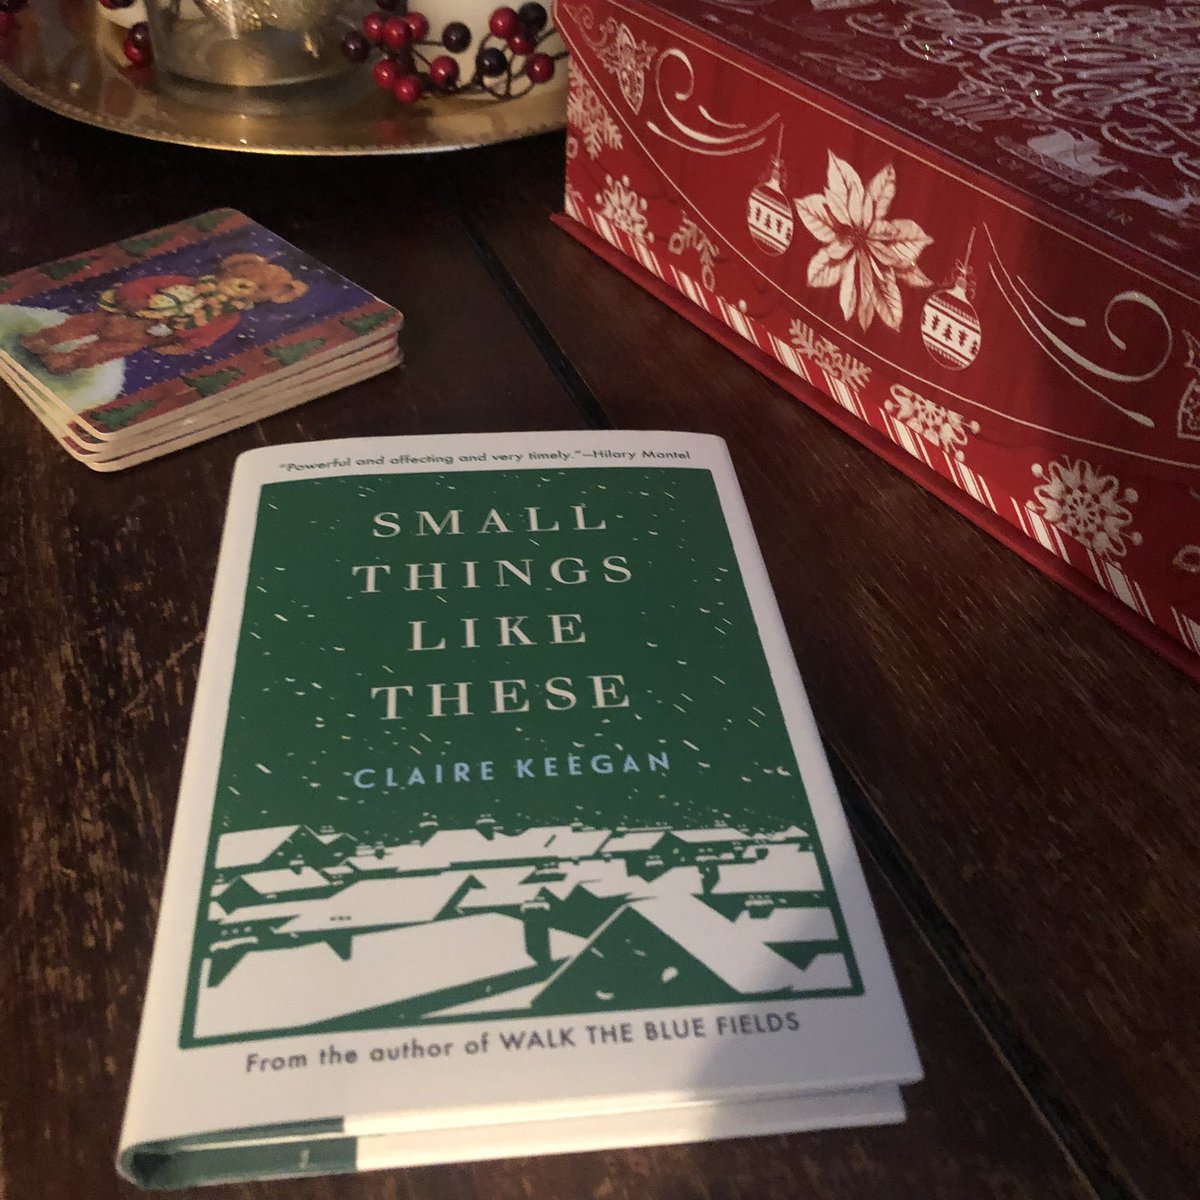 Loved this one! It’s a beautiful short story and a perfect read for this time of year👌🏻 Definitely one I can see myself rereading❤️📖 #JustRead #SmallThingsLikeThese